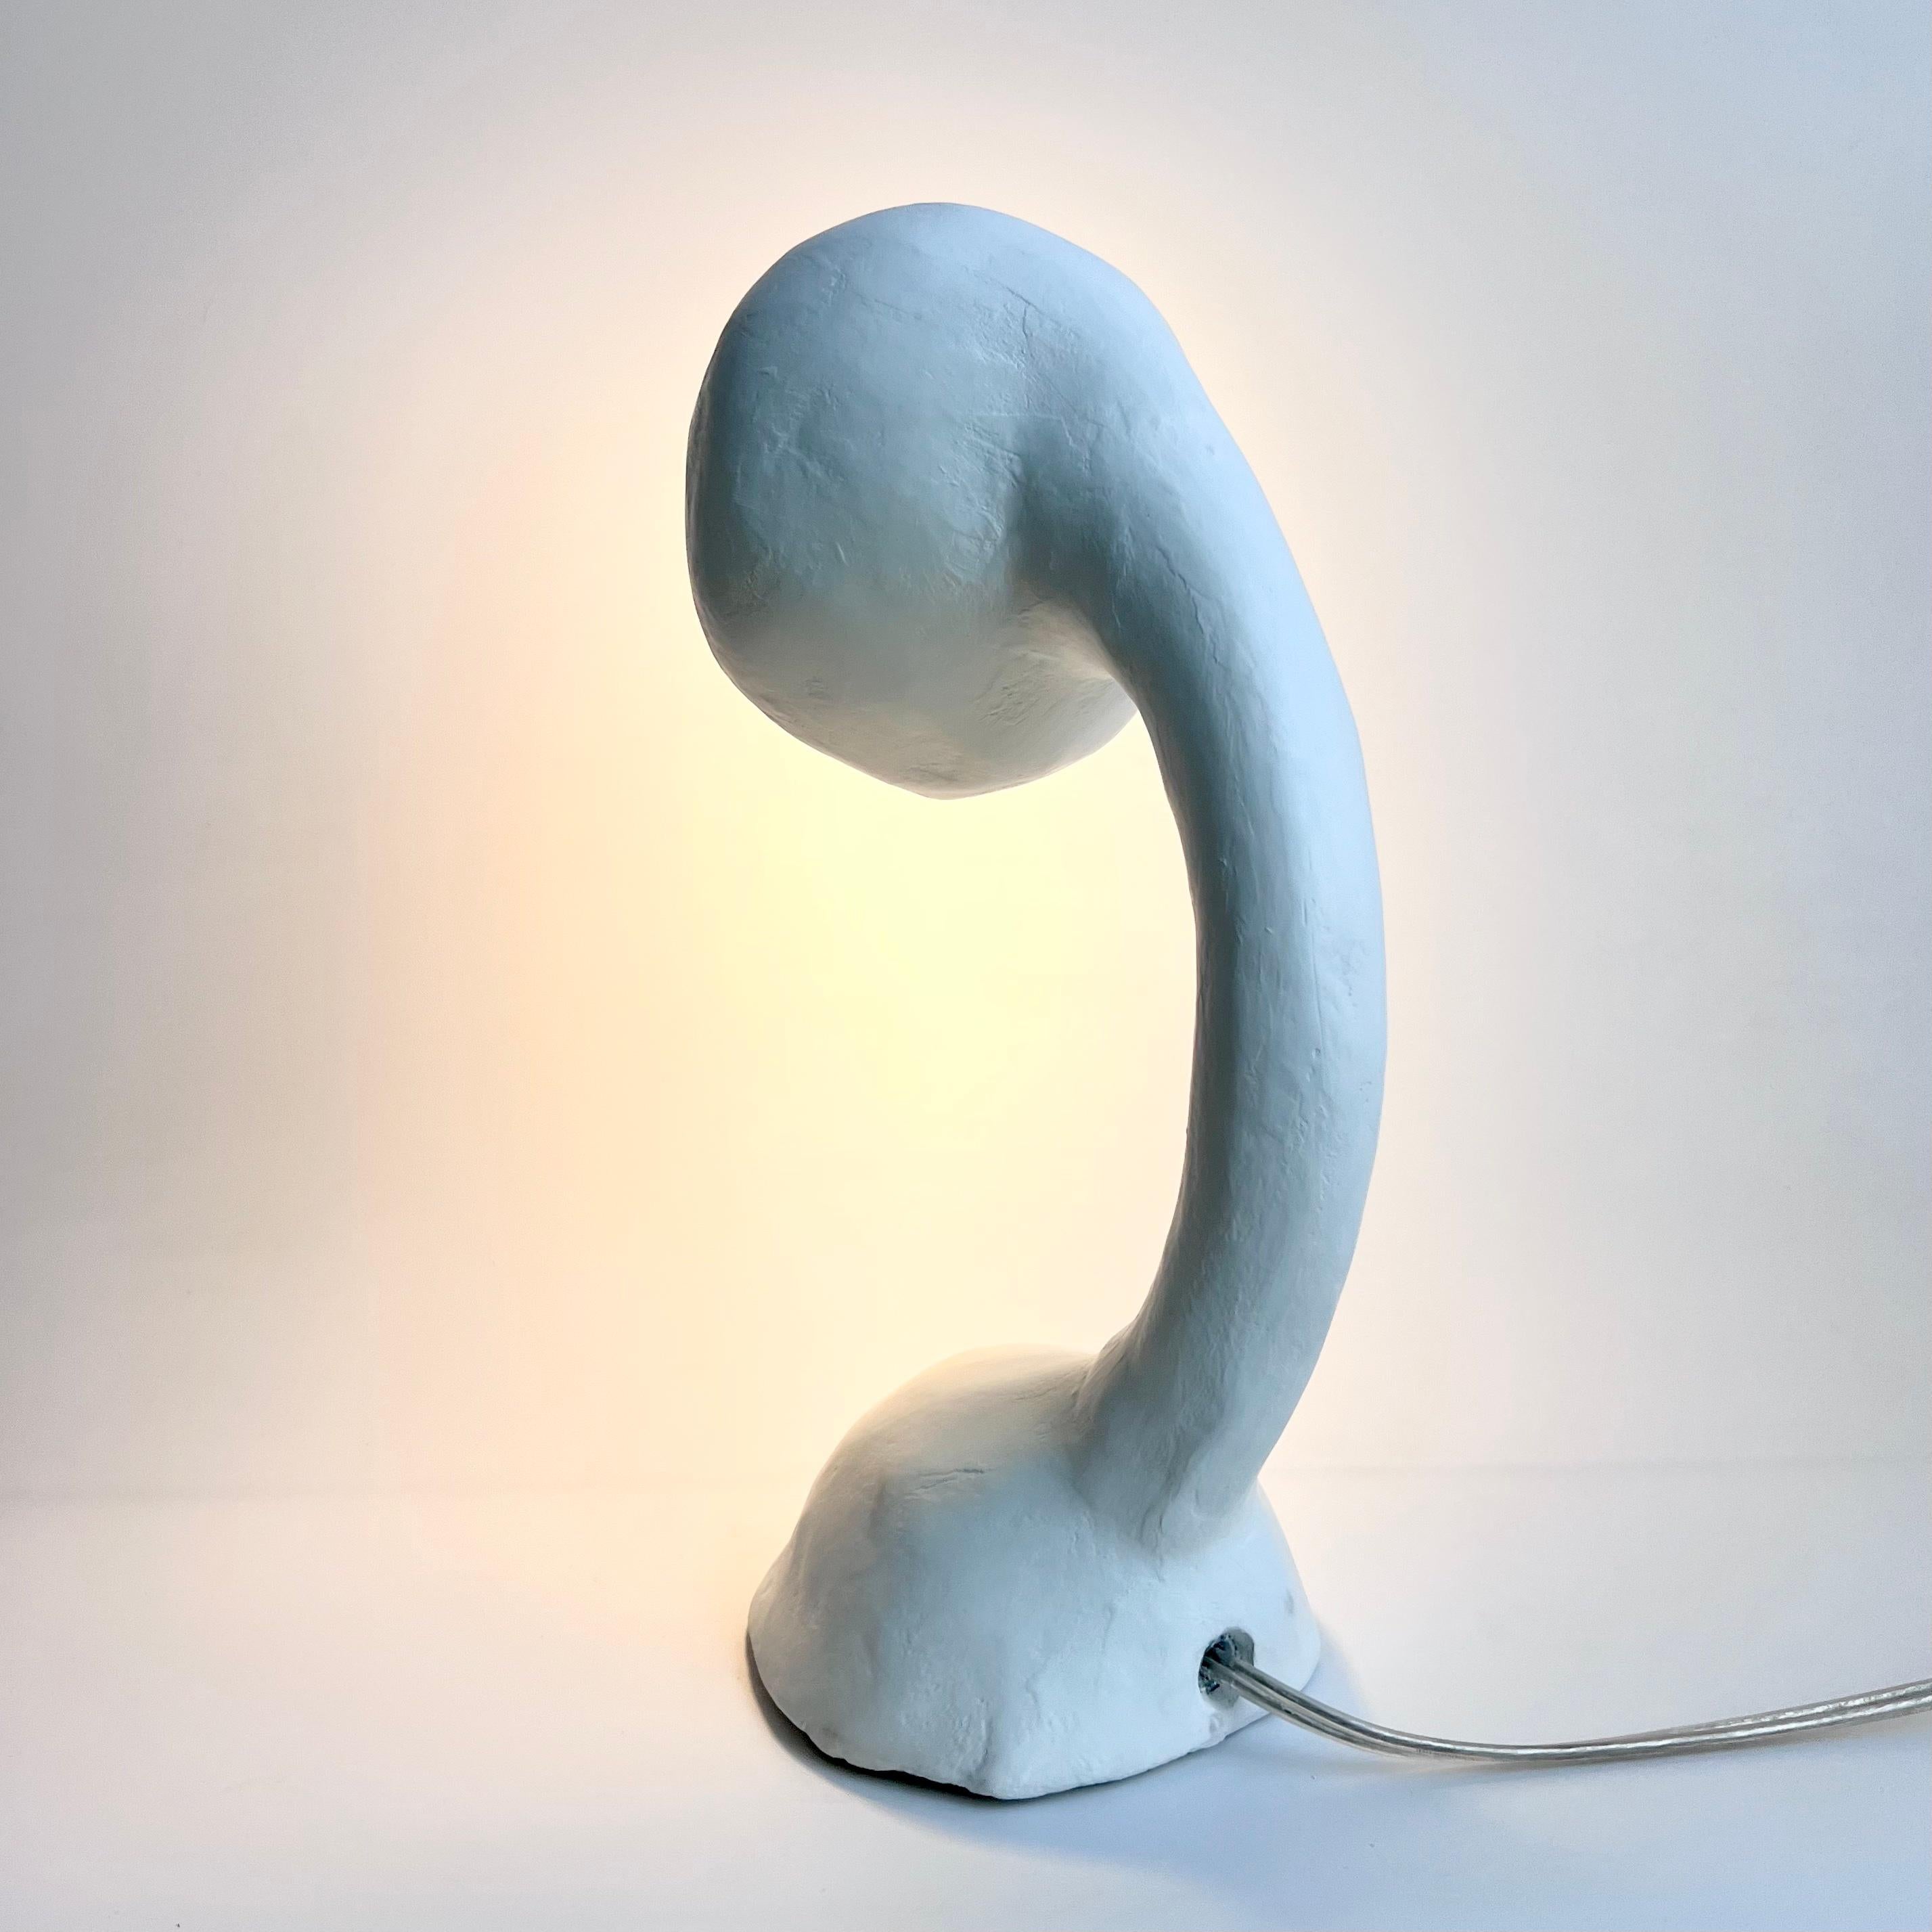 Hand-Carved Biomorphic Line by Studio Chora, Task Table Lamp, White Lime Plaster, In Stock